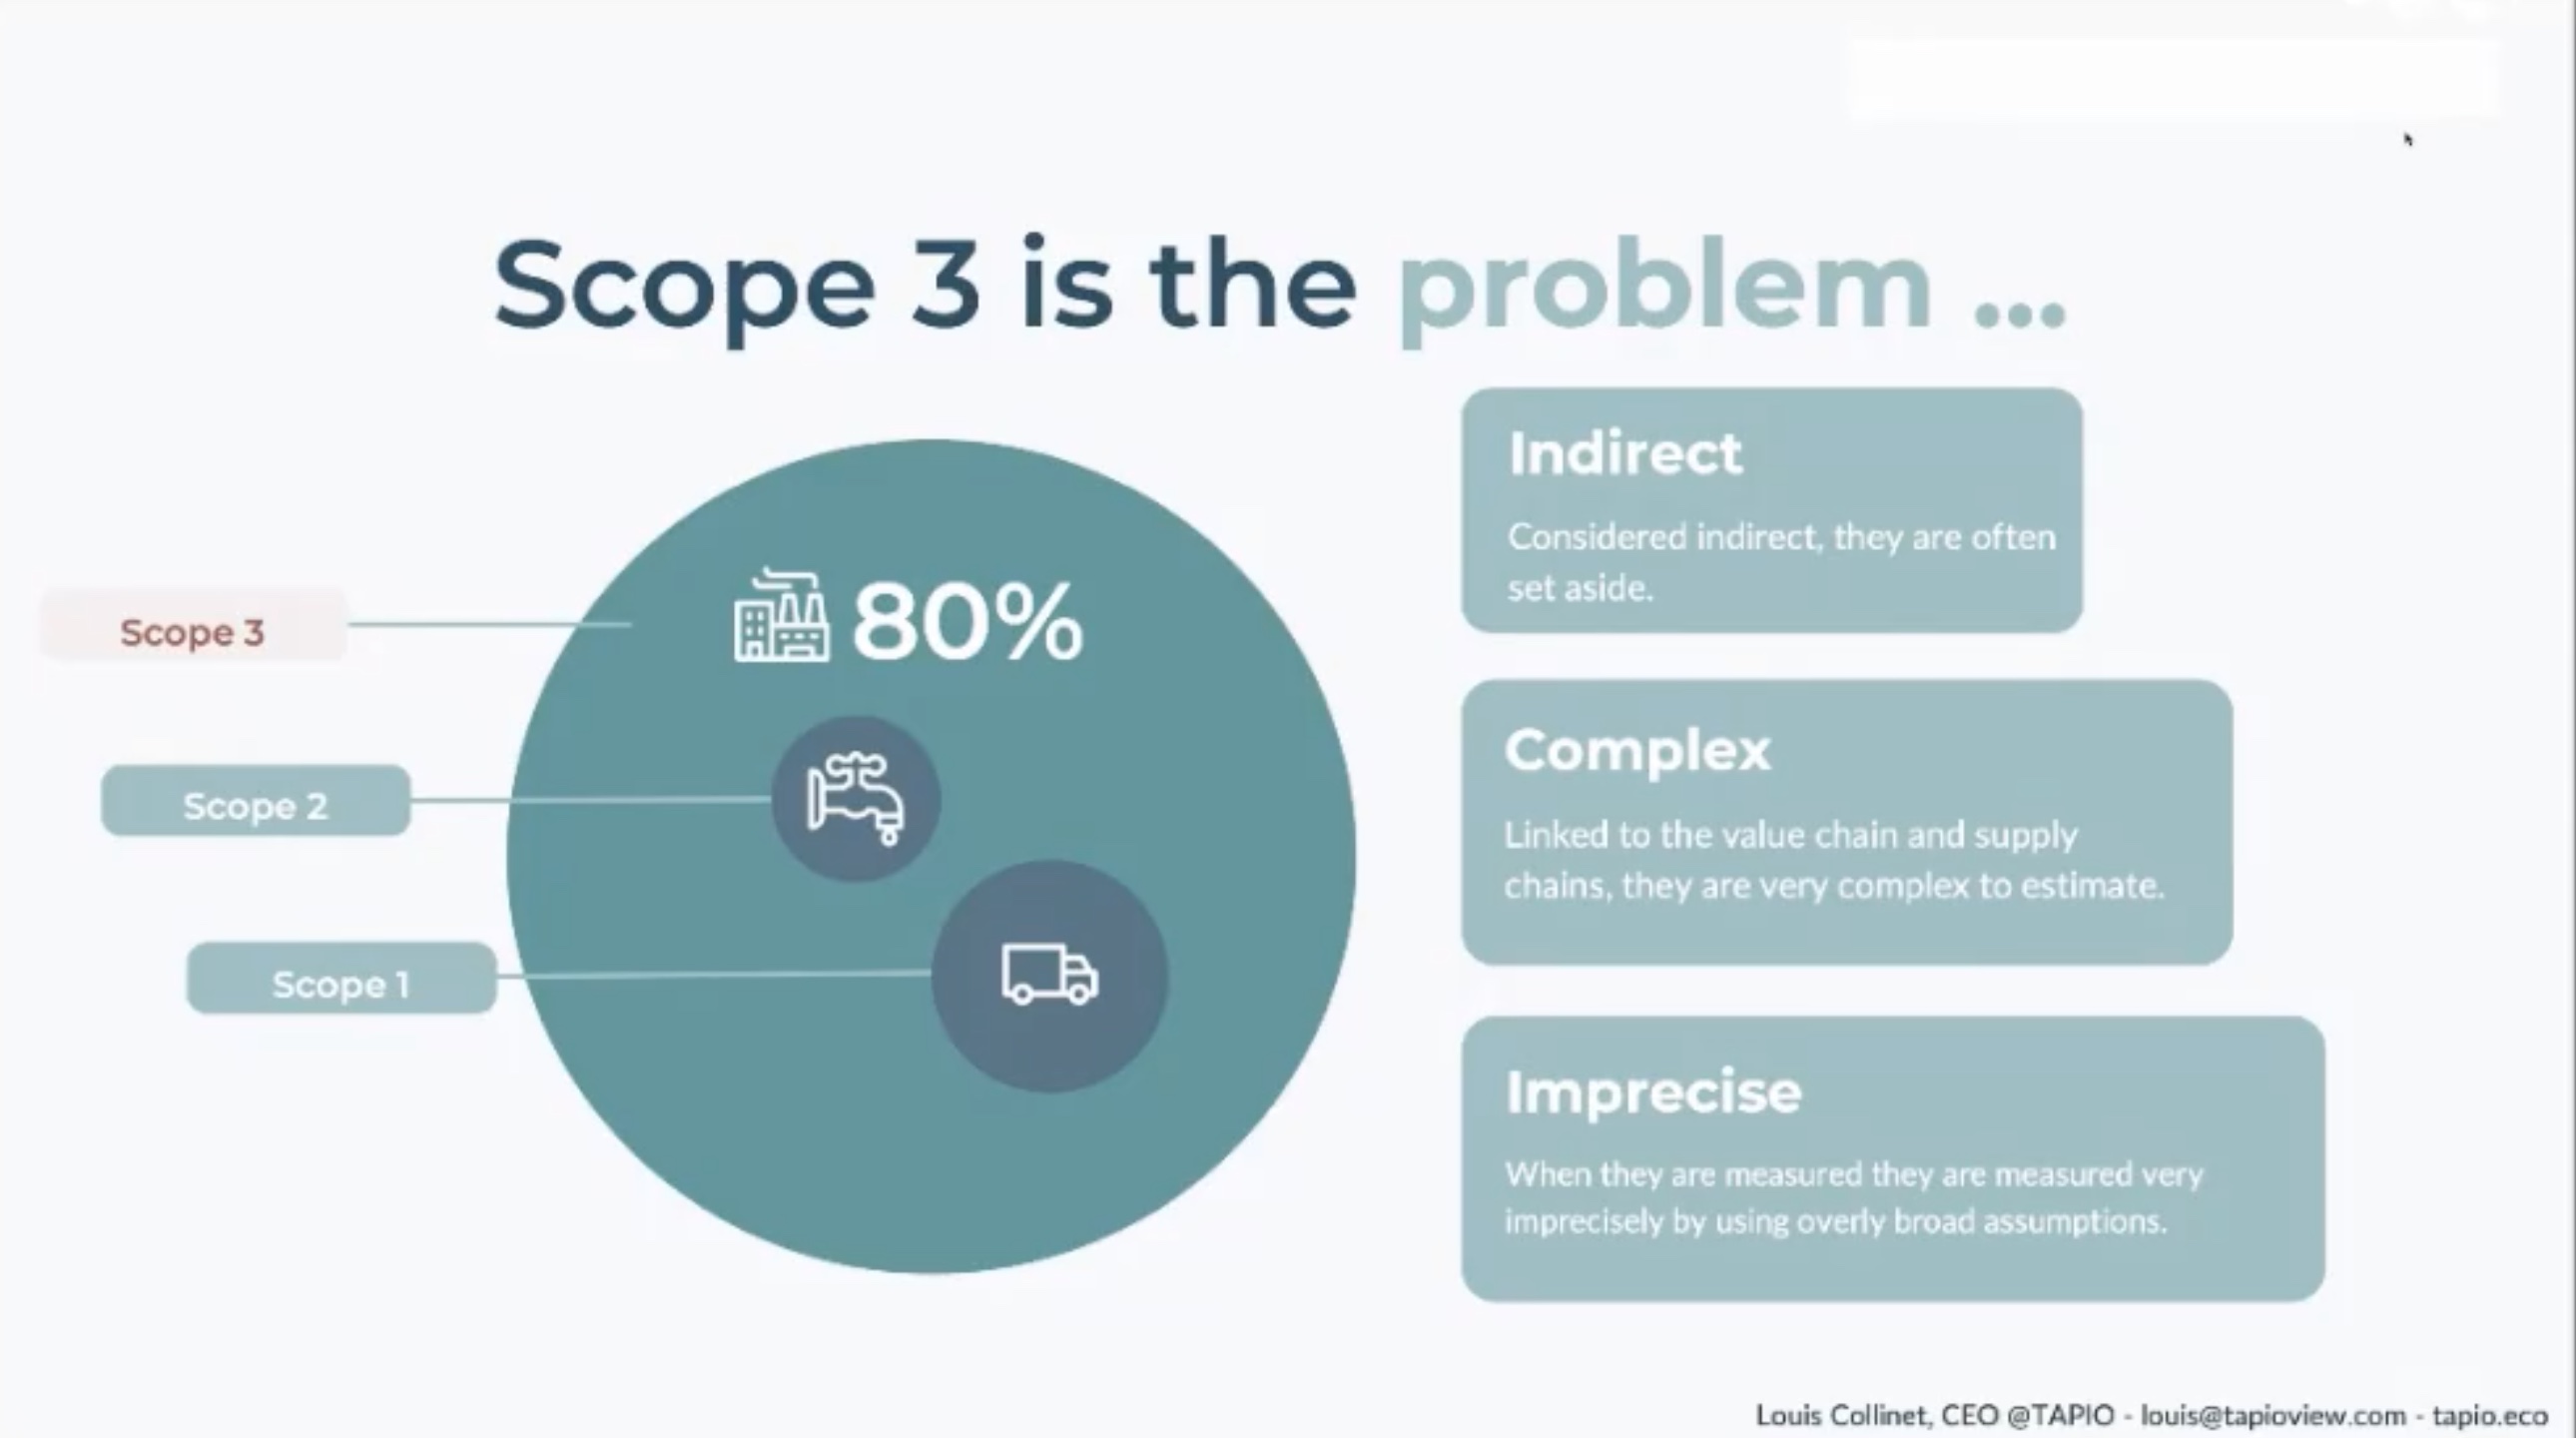 Diagram Scope 3 : Represents 70 to 80% of a company's emissions. They are indirect, complex and imprecise